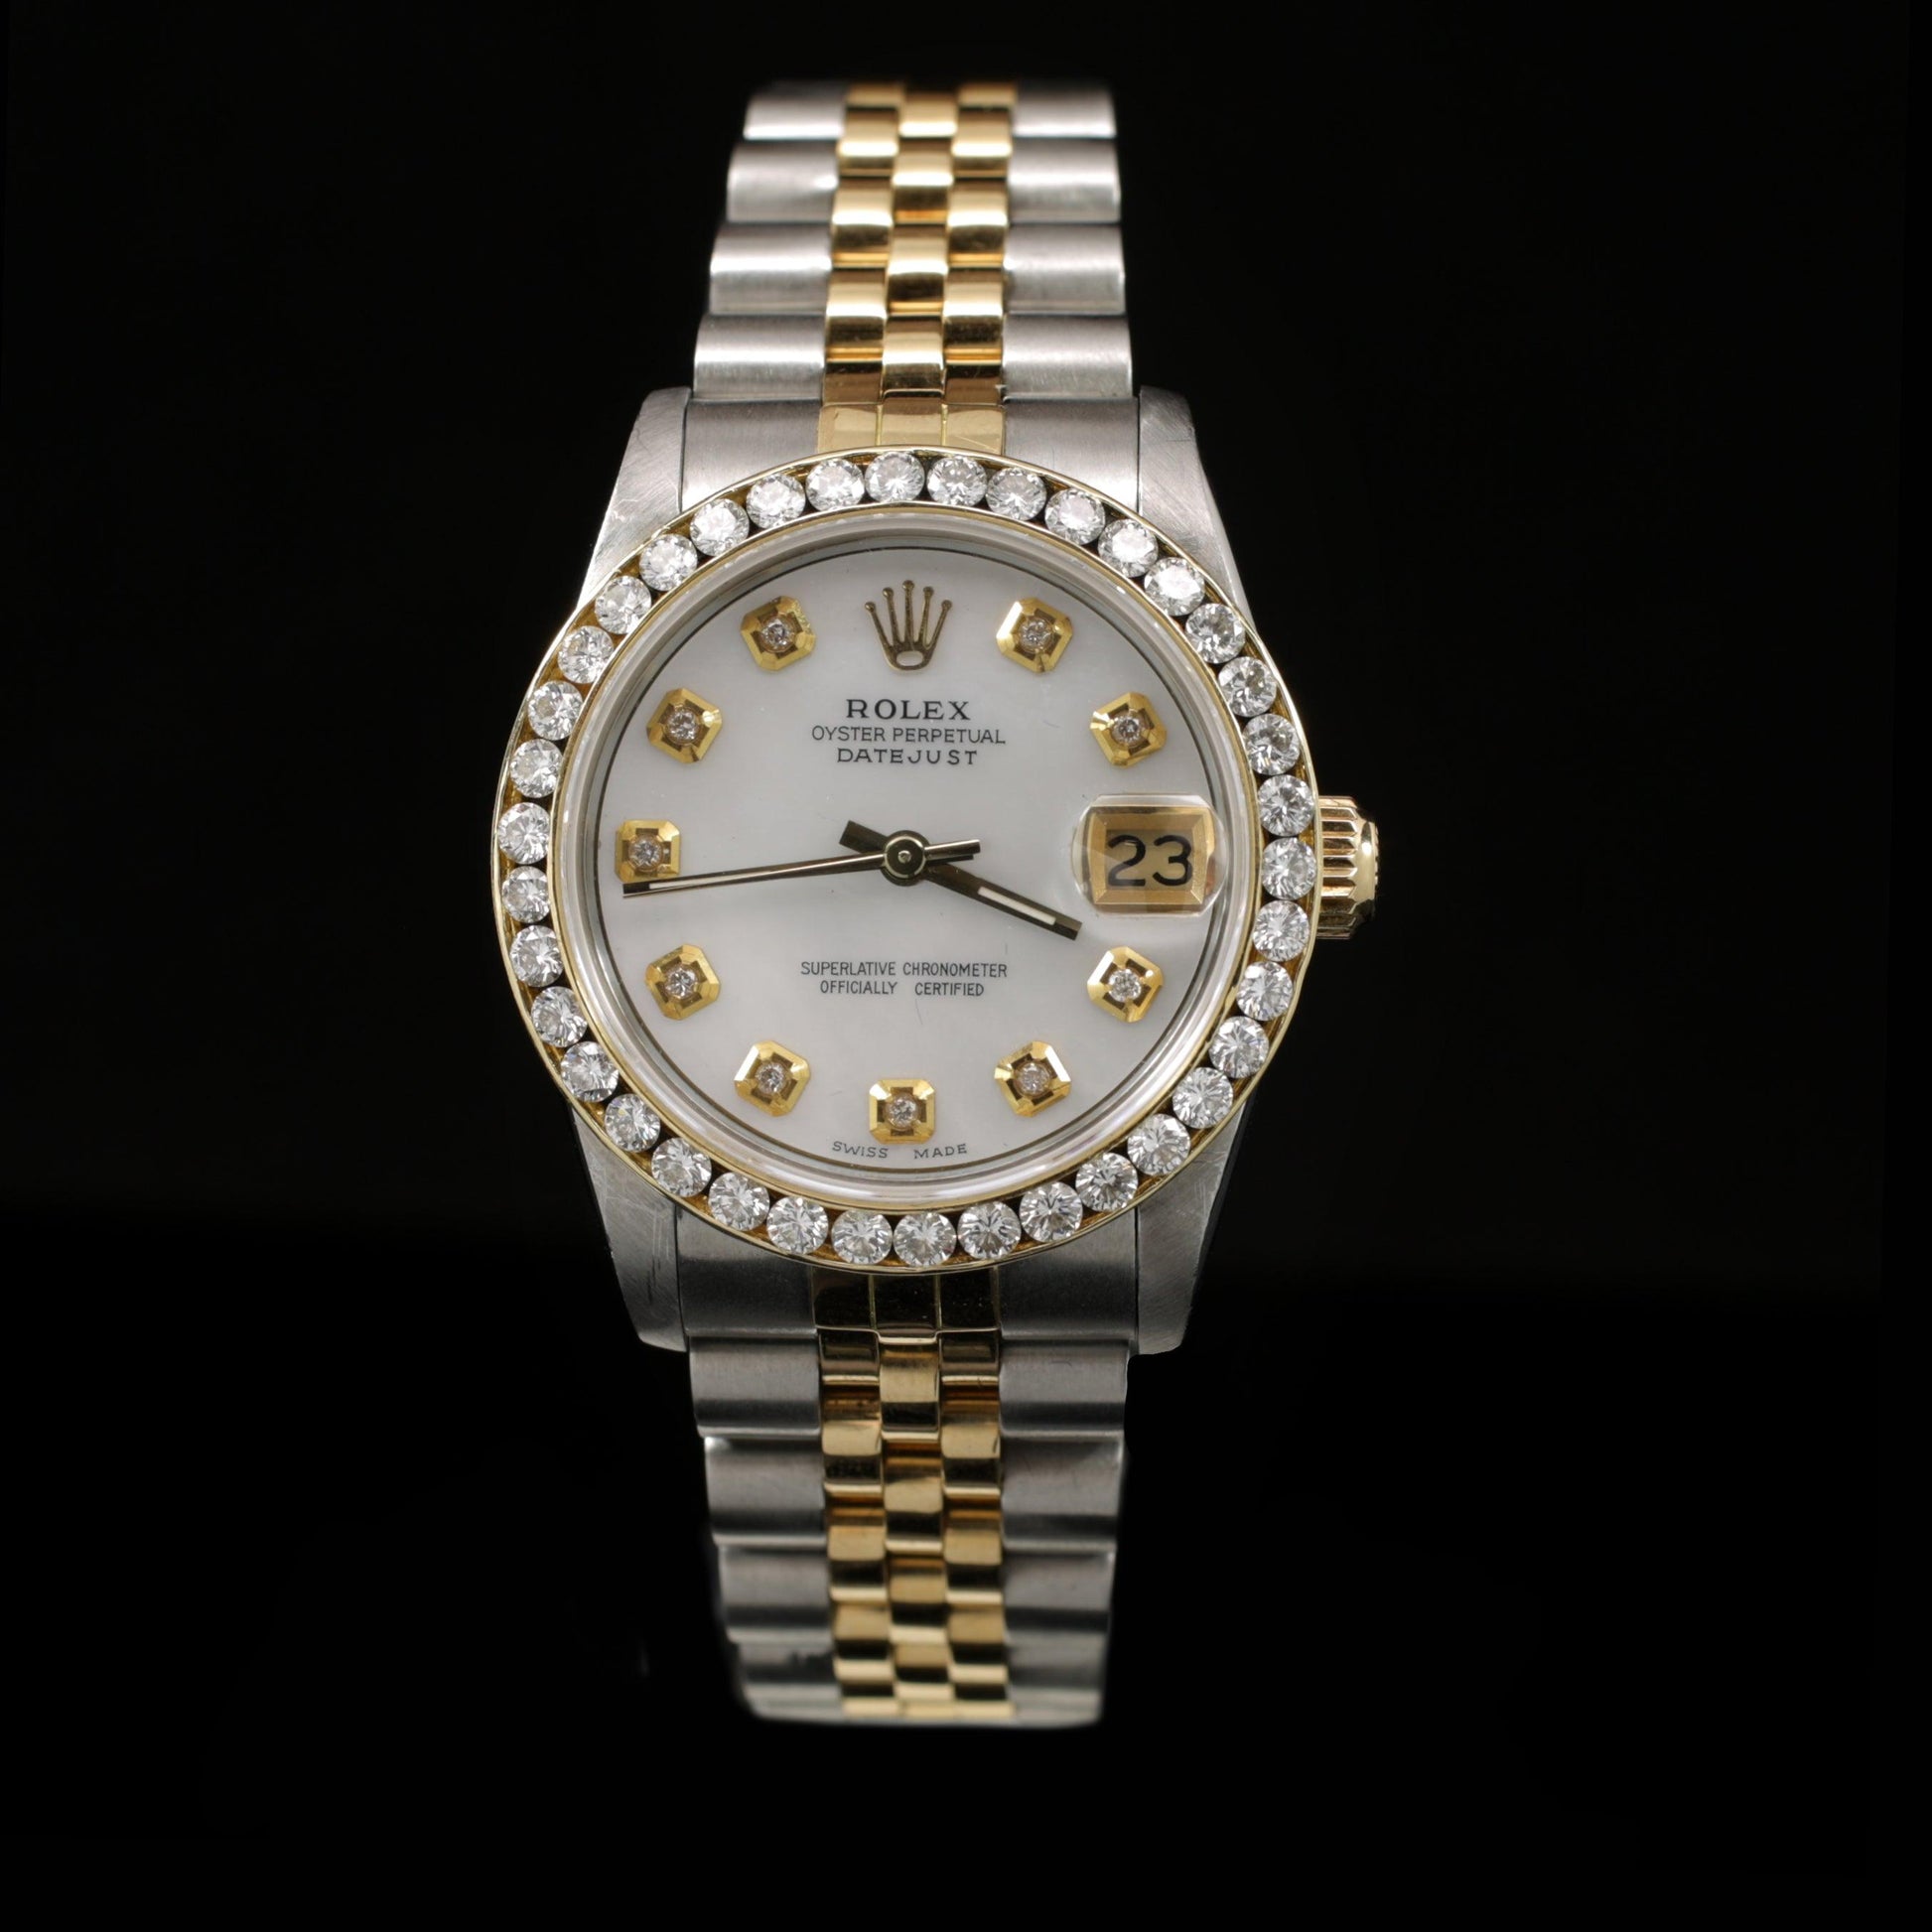 Watch - Rolex (7 Styles) - Photography and Web Design - Los Angeles, US based Shopify Experts Revo Designs